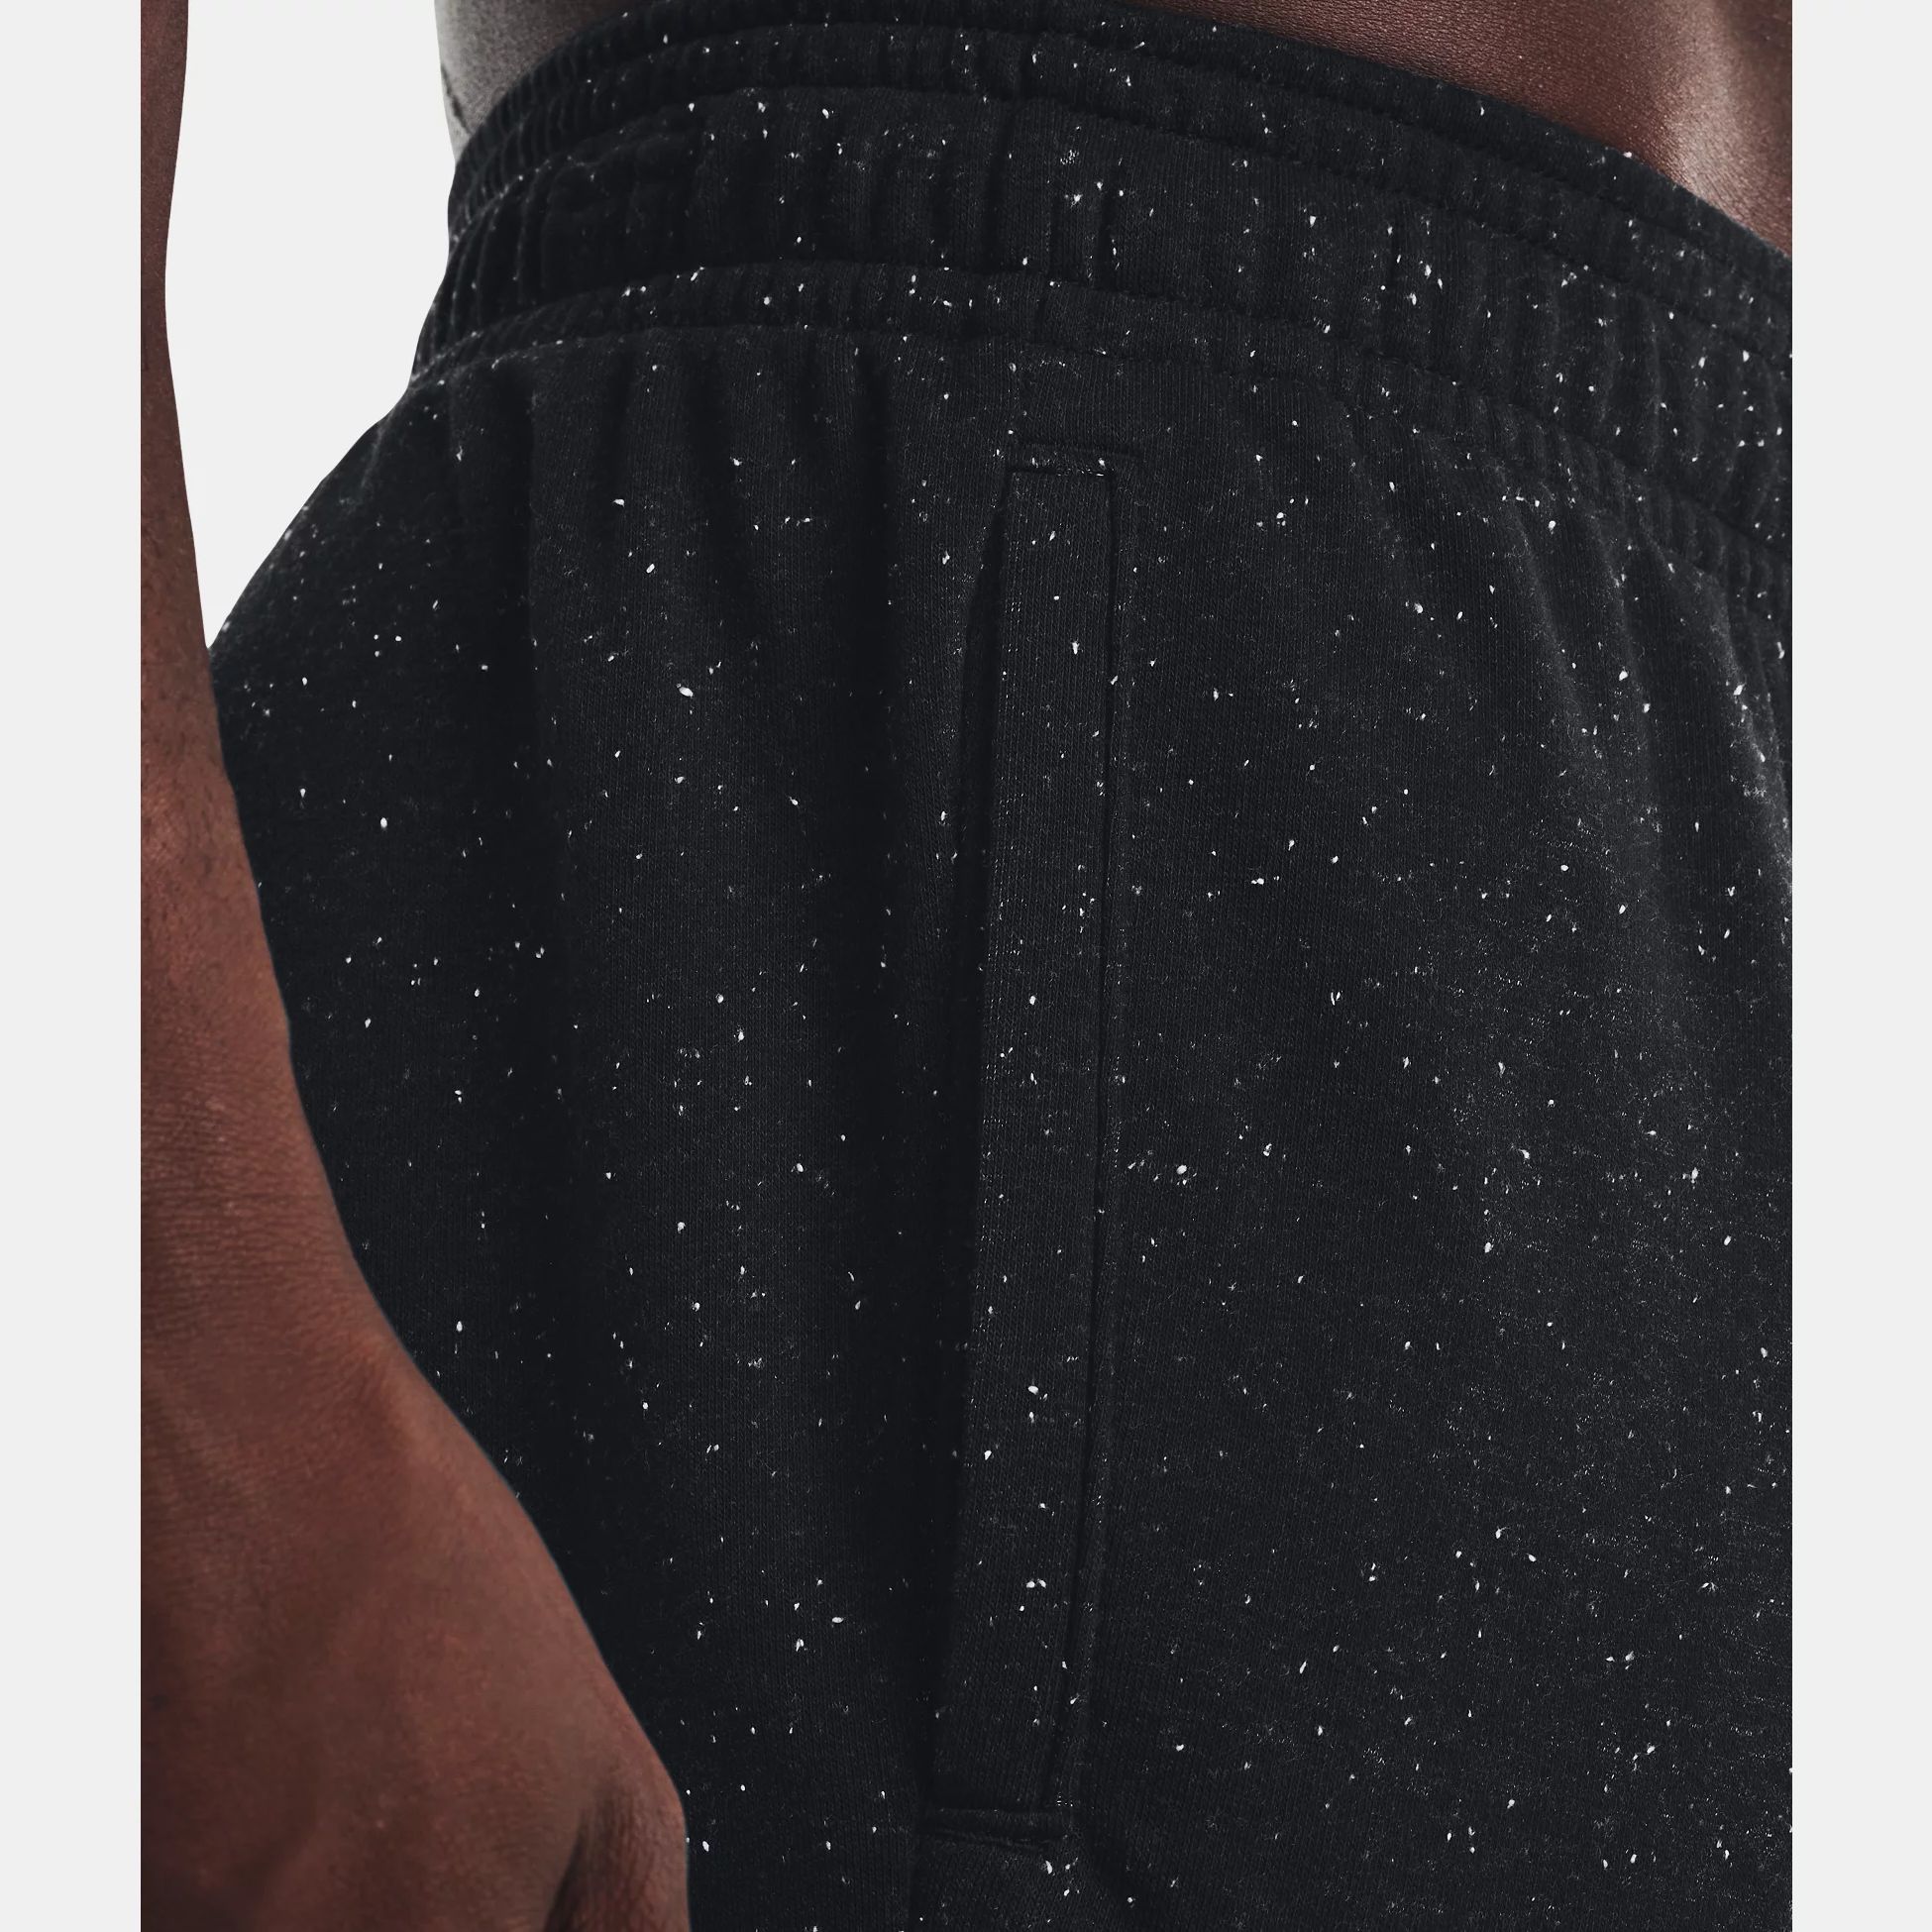 Joggers & Sweatpants -  under armour UA Rival Terry Athletic Department Joggers